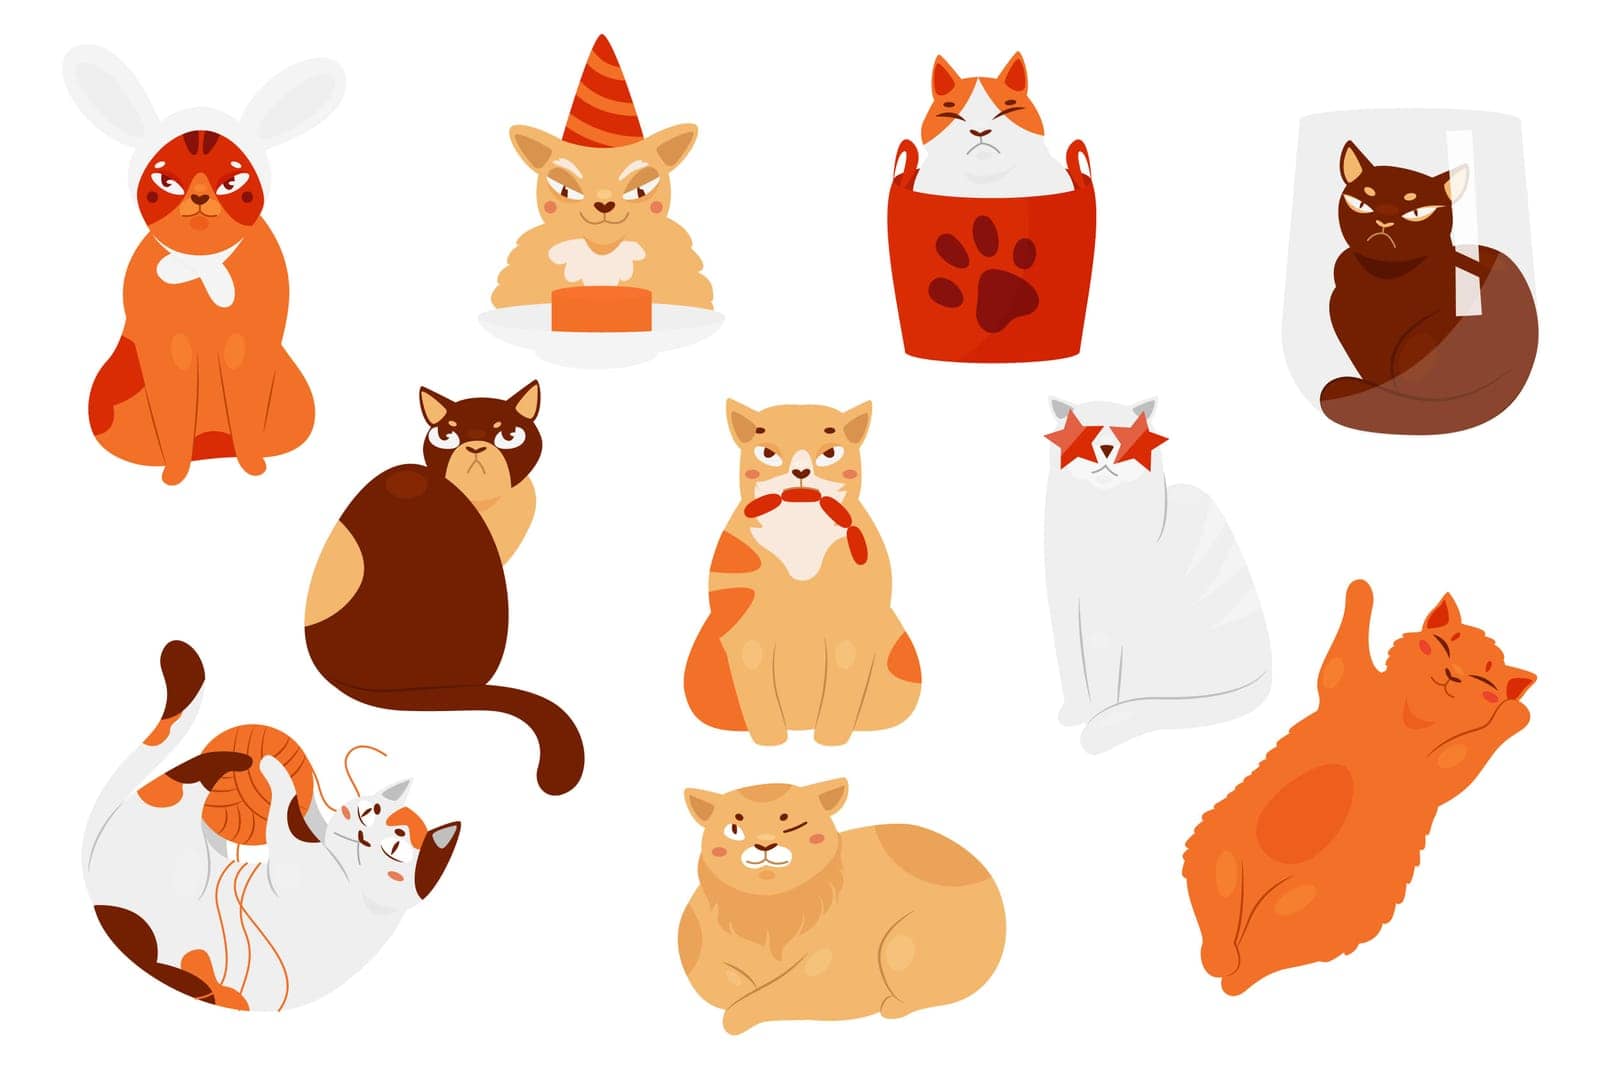 Cat pets and cute kittens in different poses vector illustration set. Cartoon lazy fat kitty character playing, sitting in box or sleeping, funny hungry cat pet eating sausage isolated on white